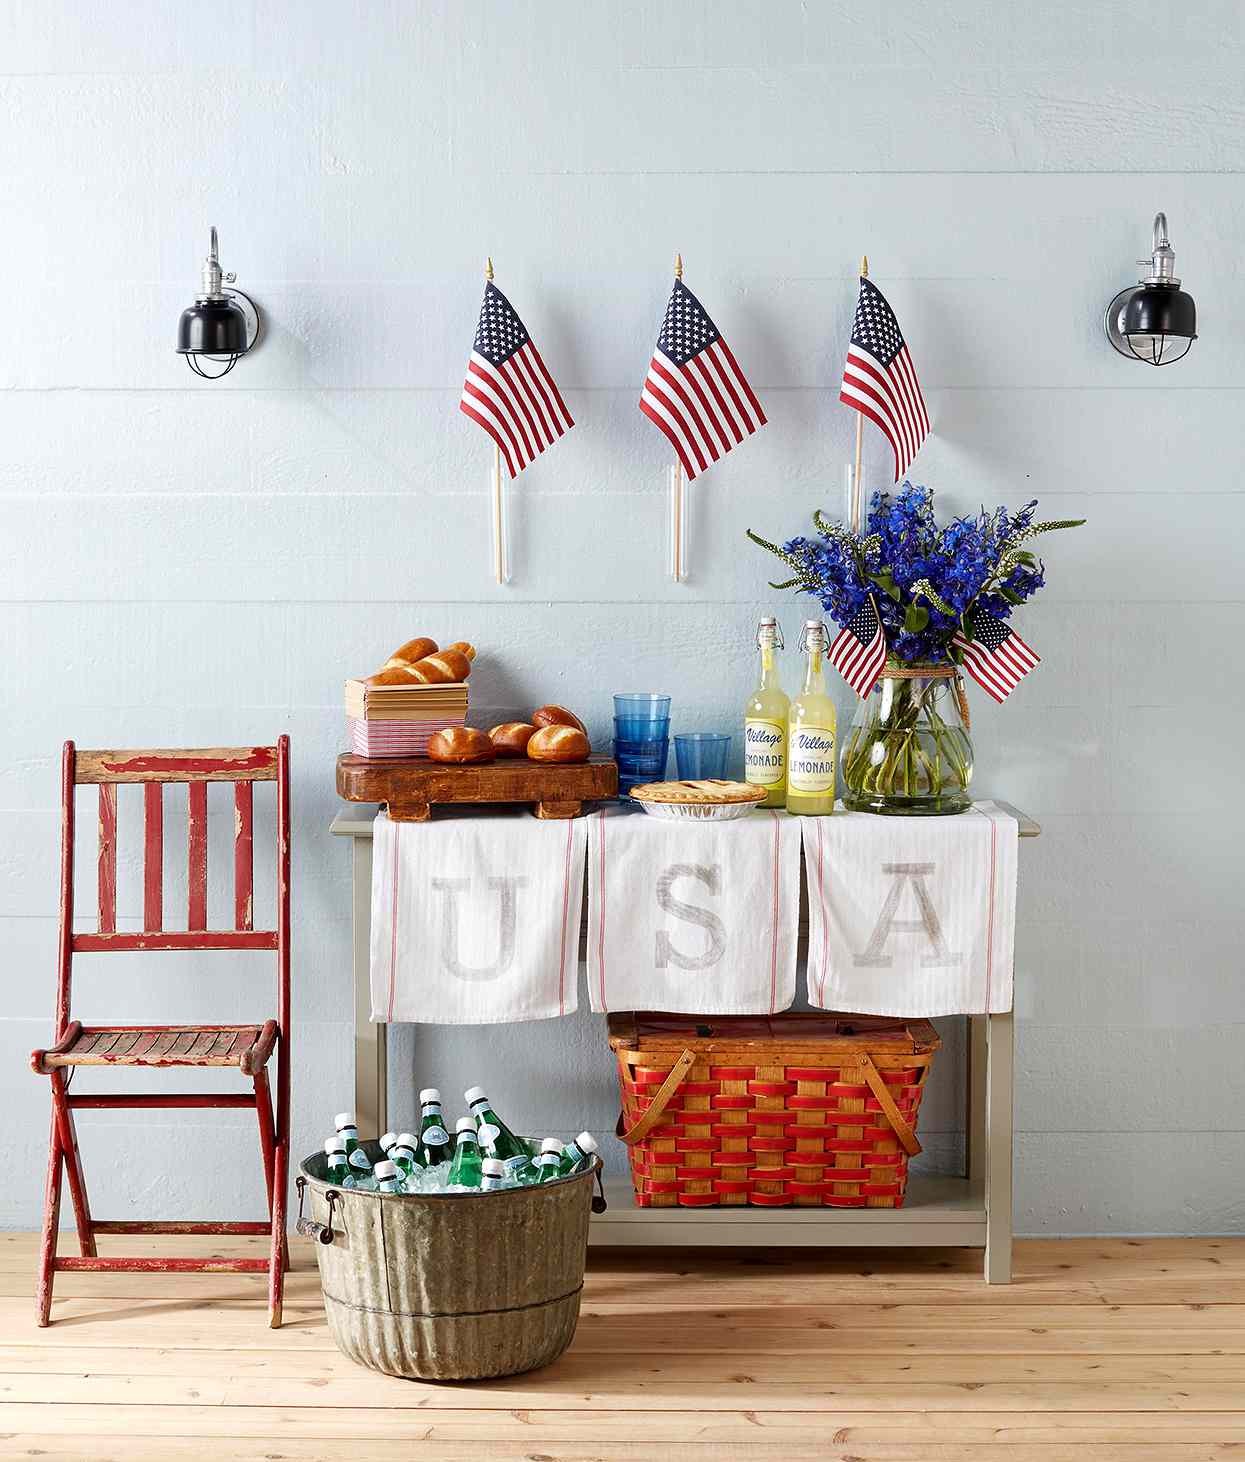 patriotic-decorating-ideas-for-the-fourth-of-july-better-homes-gardens